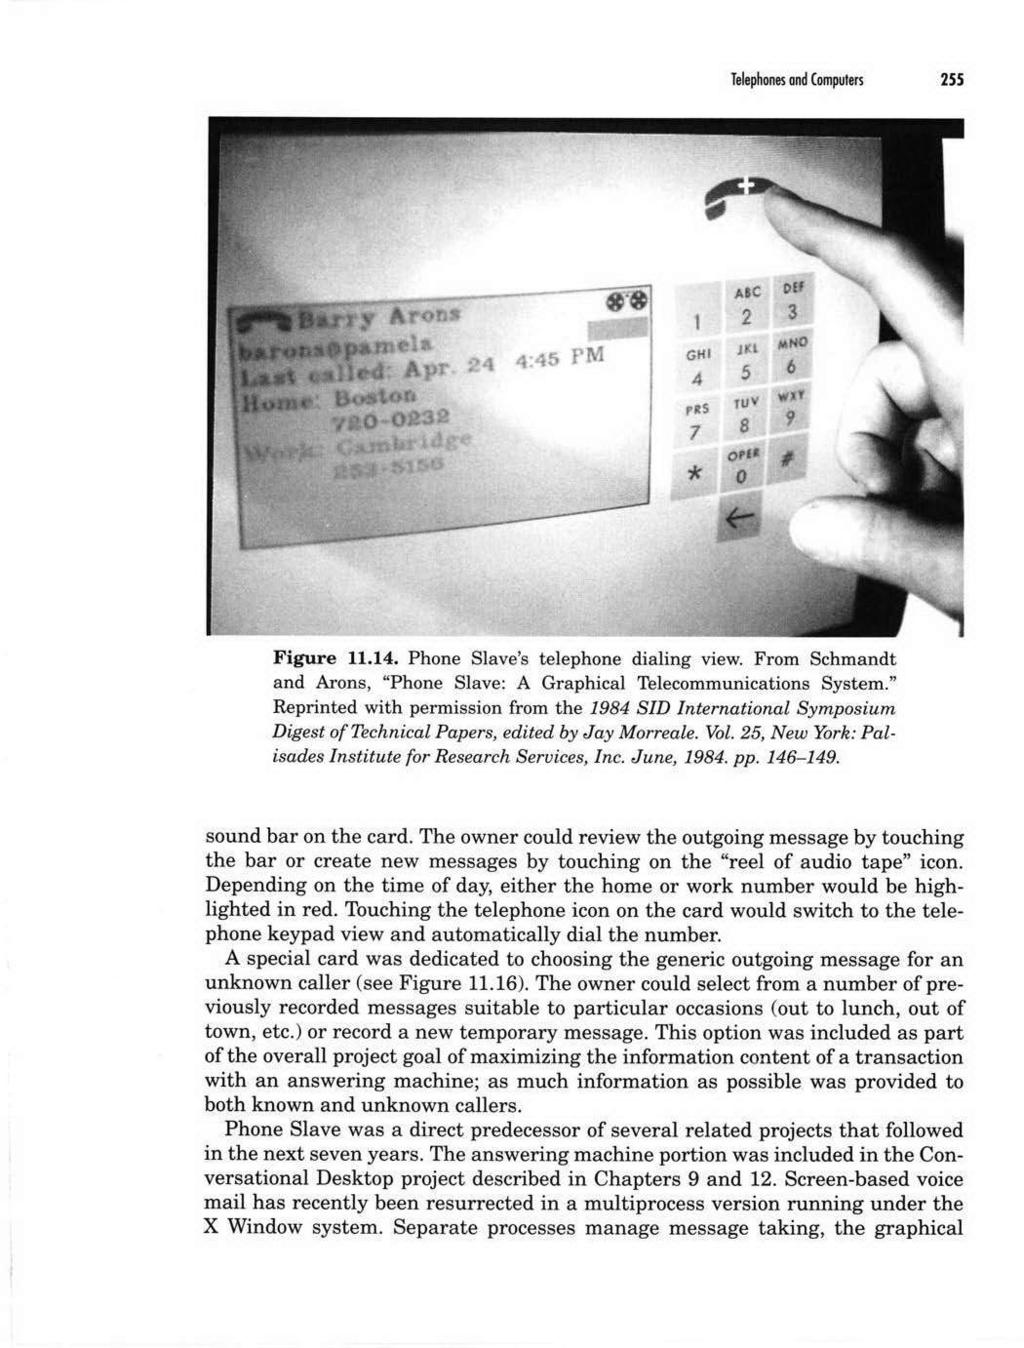 Telephlo and Compuens 255-4 'C K Figure 11.14. Phone Slave's telephone dialing view. From Schmandt and Arons, "Phone Slave: A Graphical Telecommunications System.